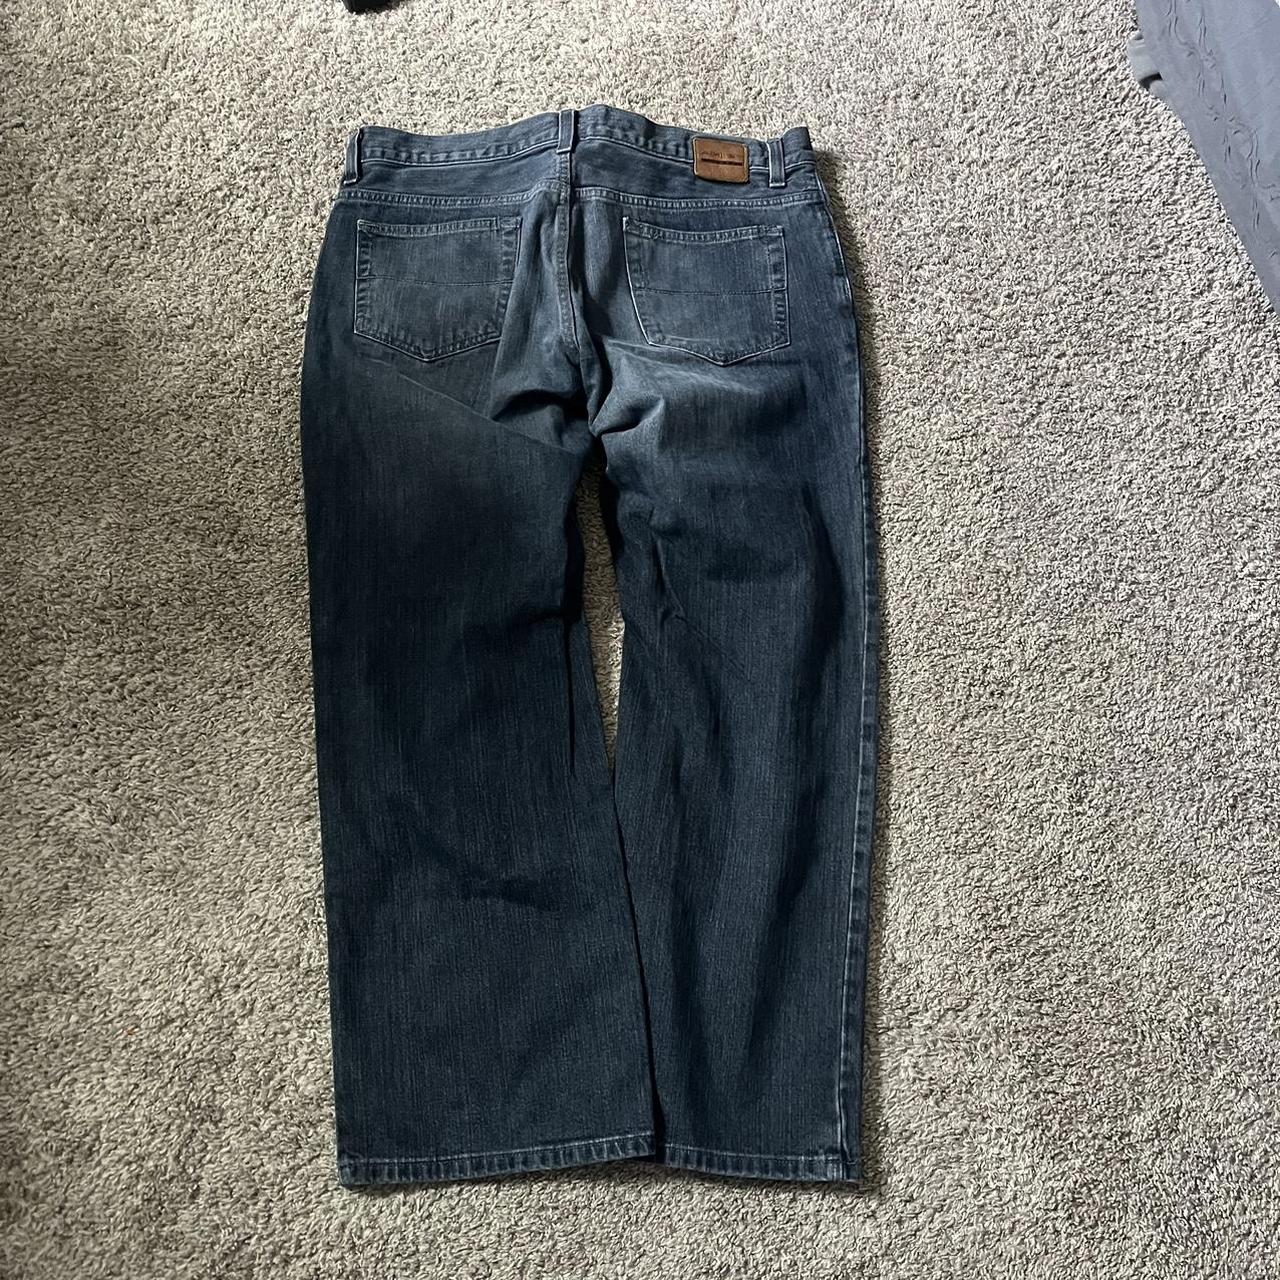 Insane pair of super baggy axist jeans, dm me with... - Depop